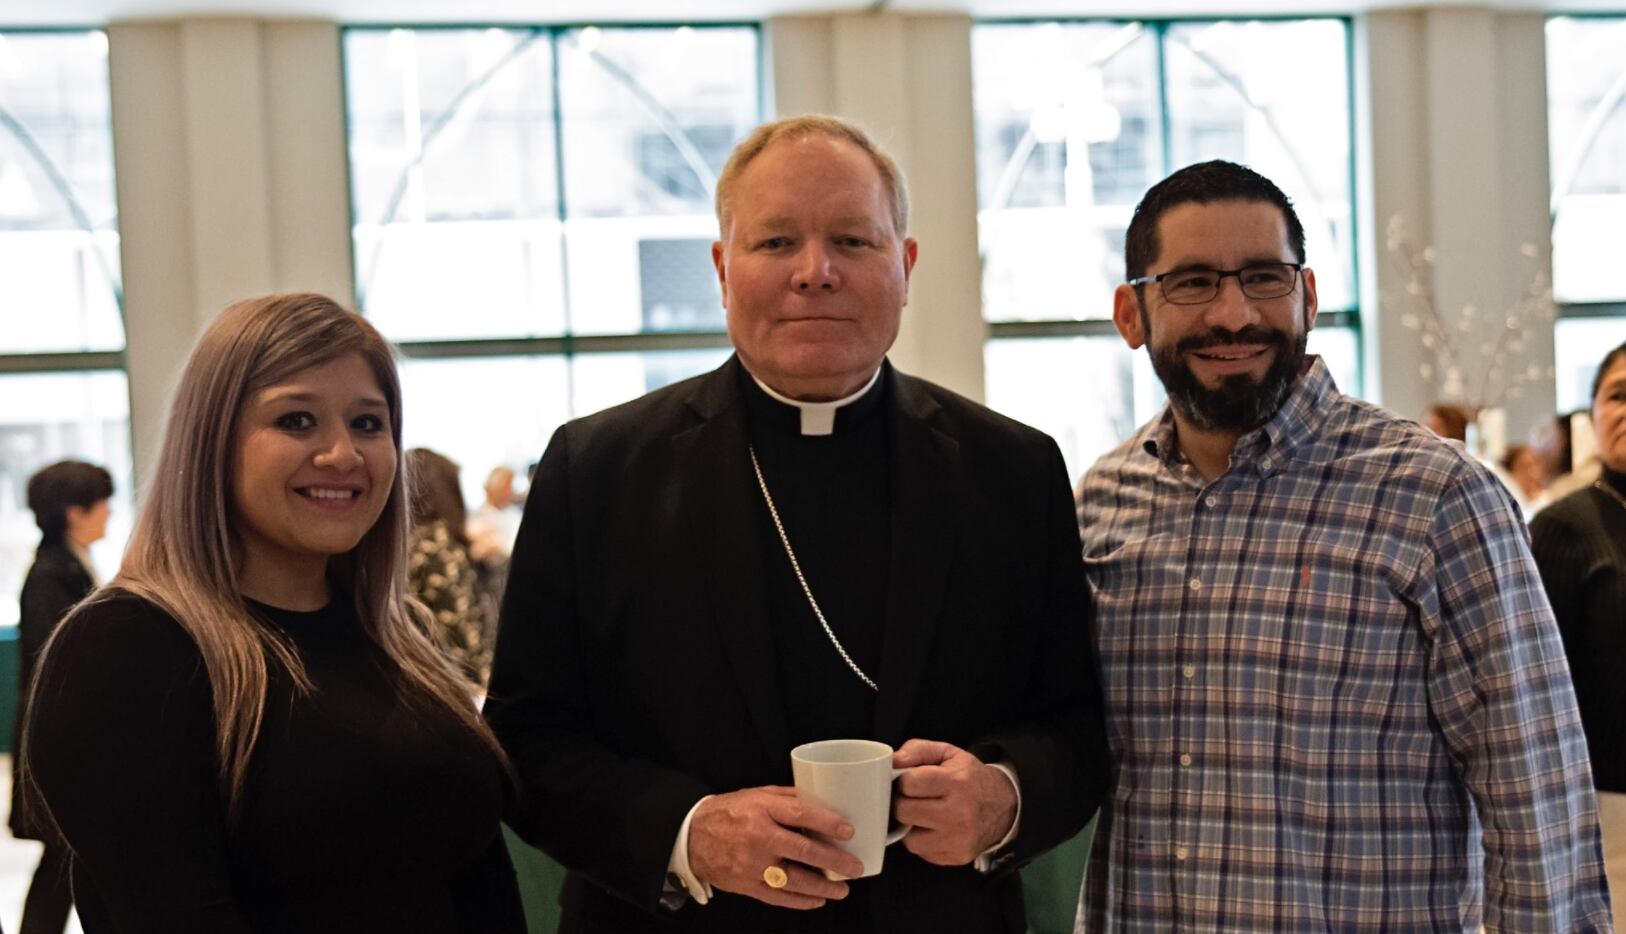 Bishop Edward Burns poses for a photo with nurse Magali Reynoso (left) and Dallas SWAT...